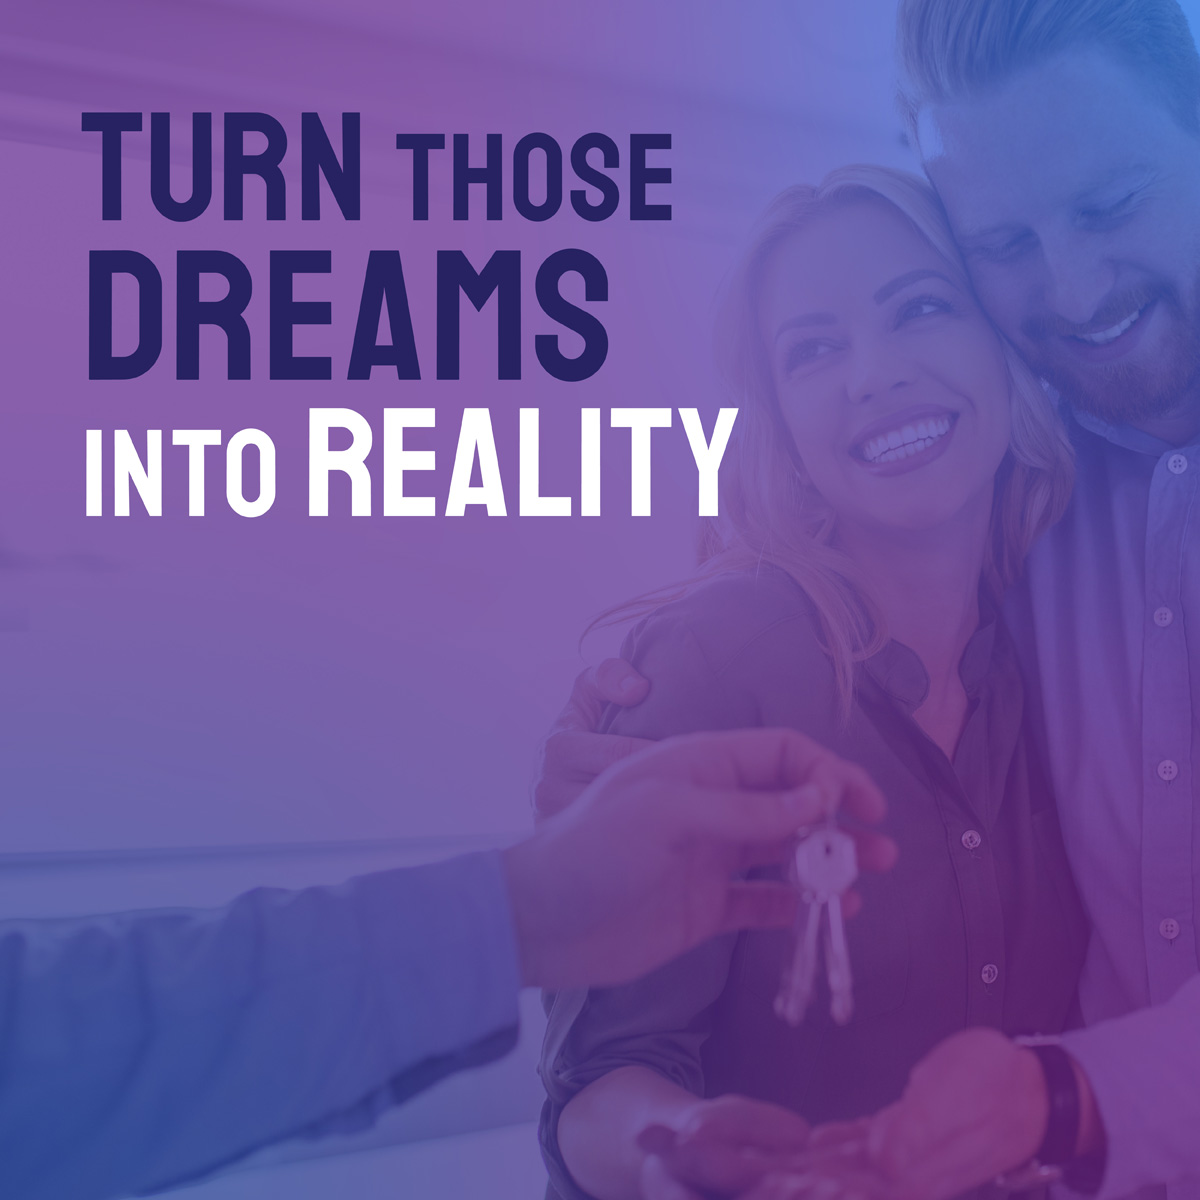 Are you ready to buy your dream home? We're here to help you navigate the process, and find a home that meets your needs! Call today to get started. #1stur #homeloans #mortgageexperts #socalrealestate #californiarealestate #californiarealtors #homegoals #homebuying #homesweethome